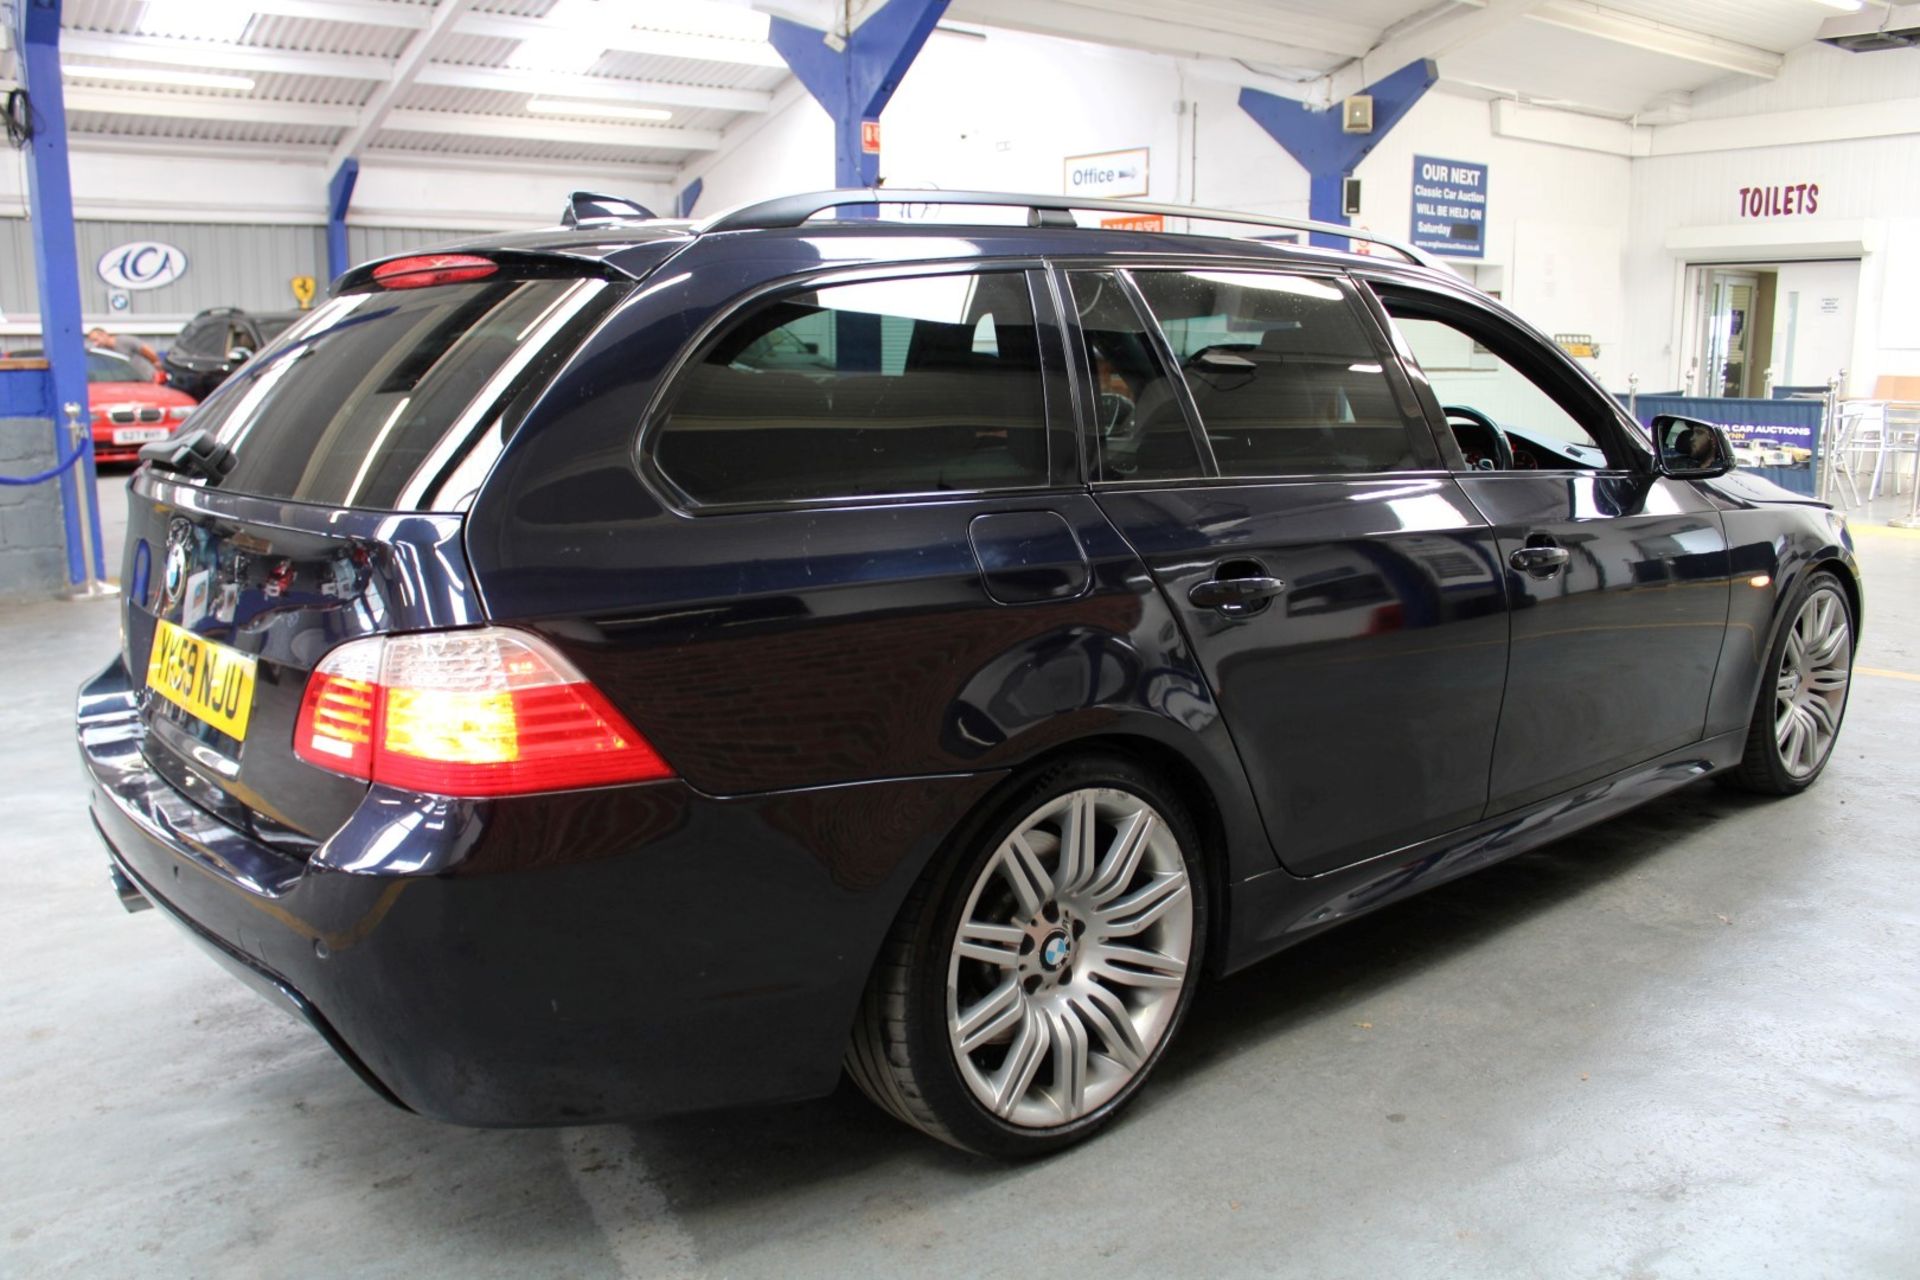 59 09 BMW 535D M Sport Touring - Image 22 of 27